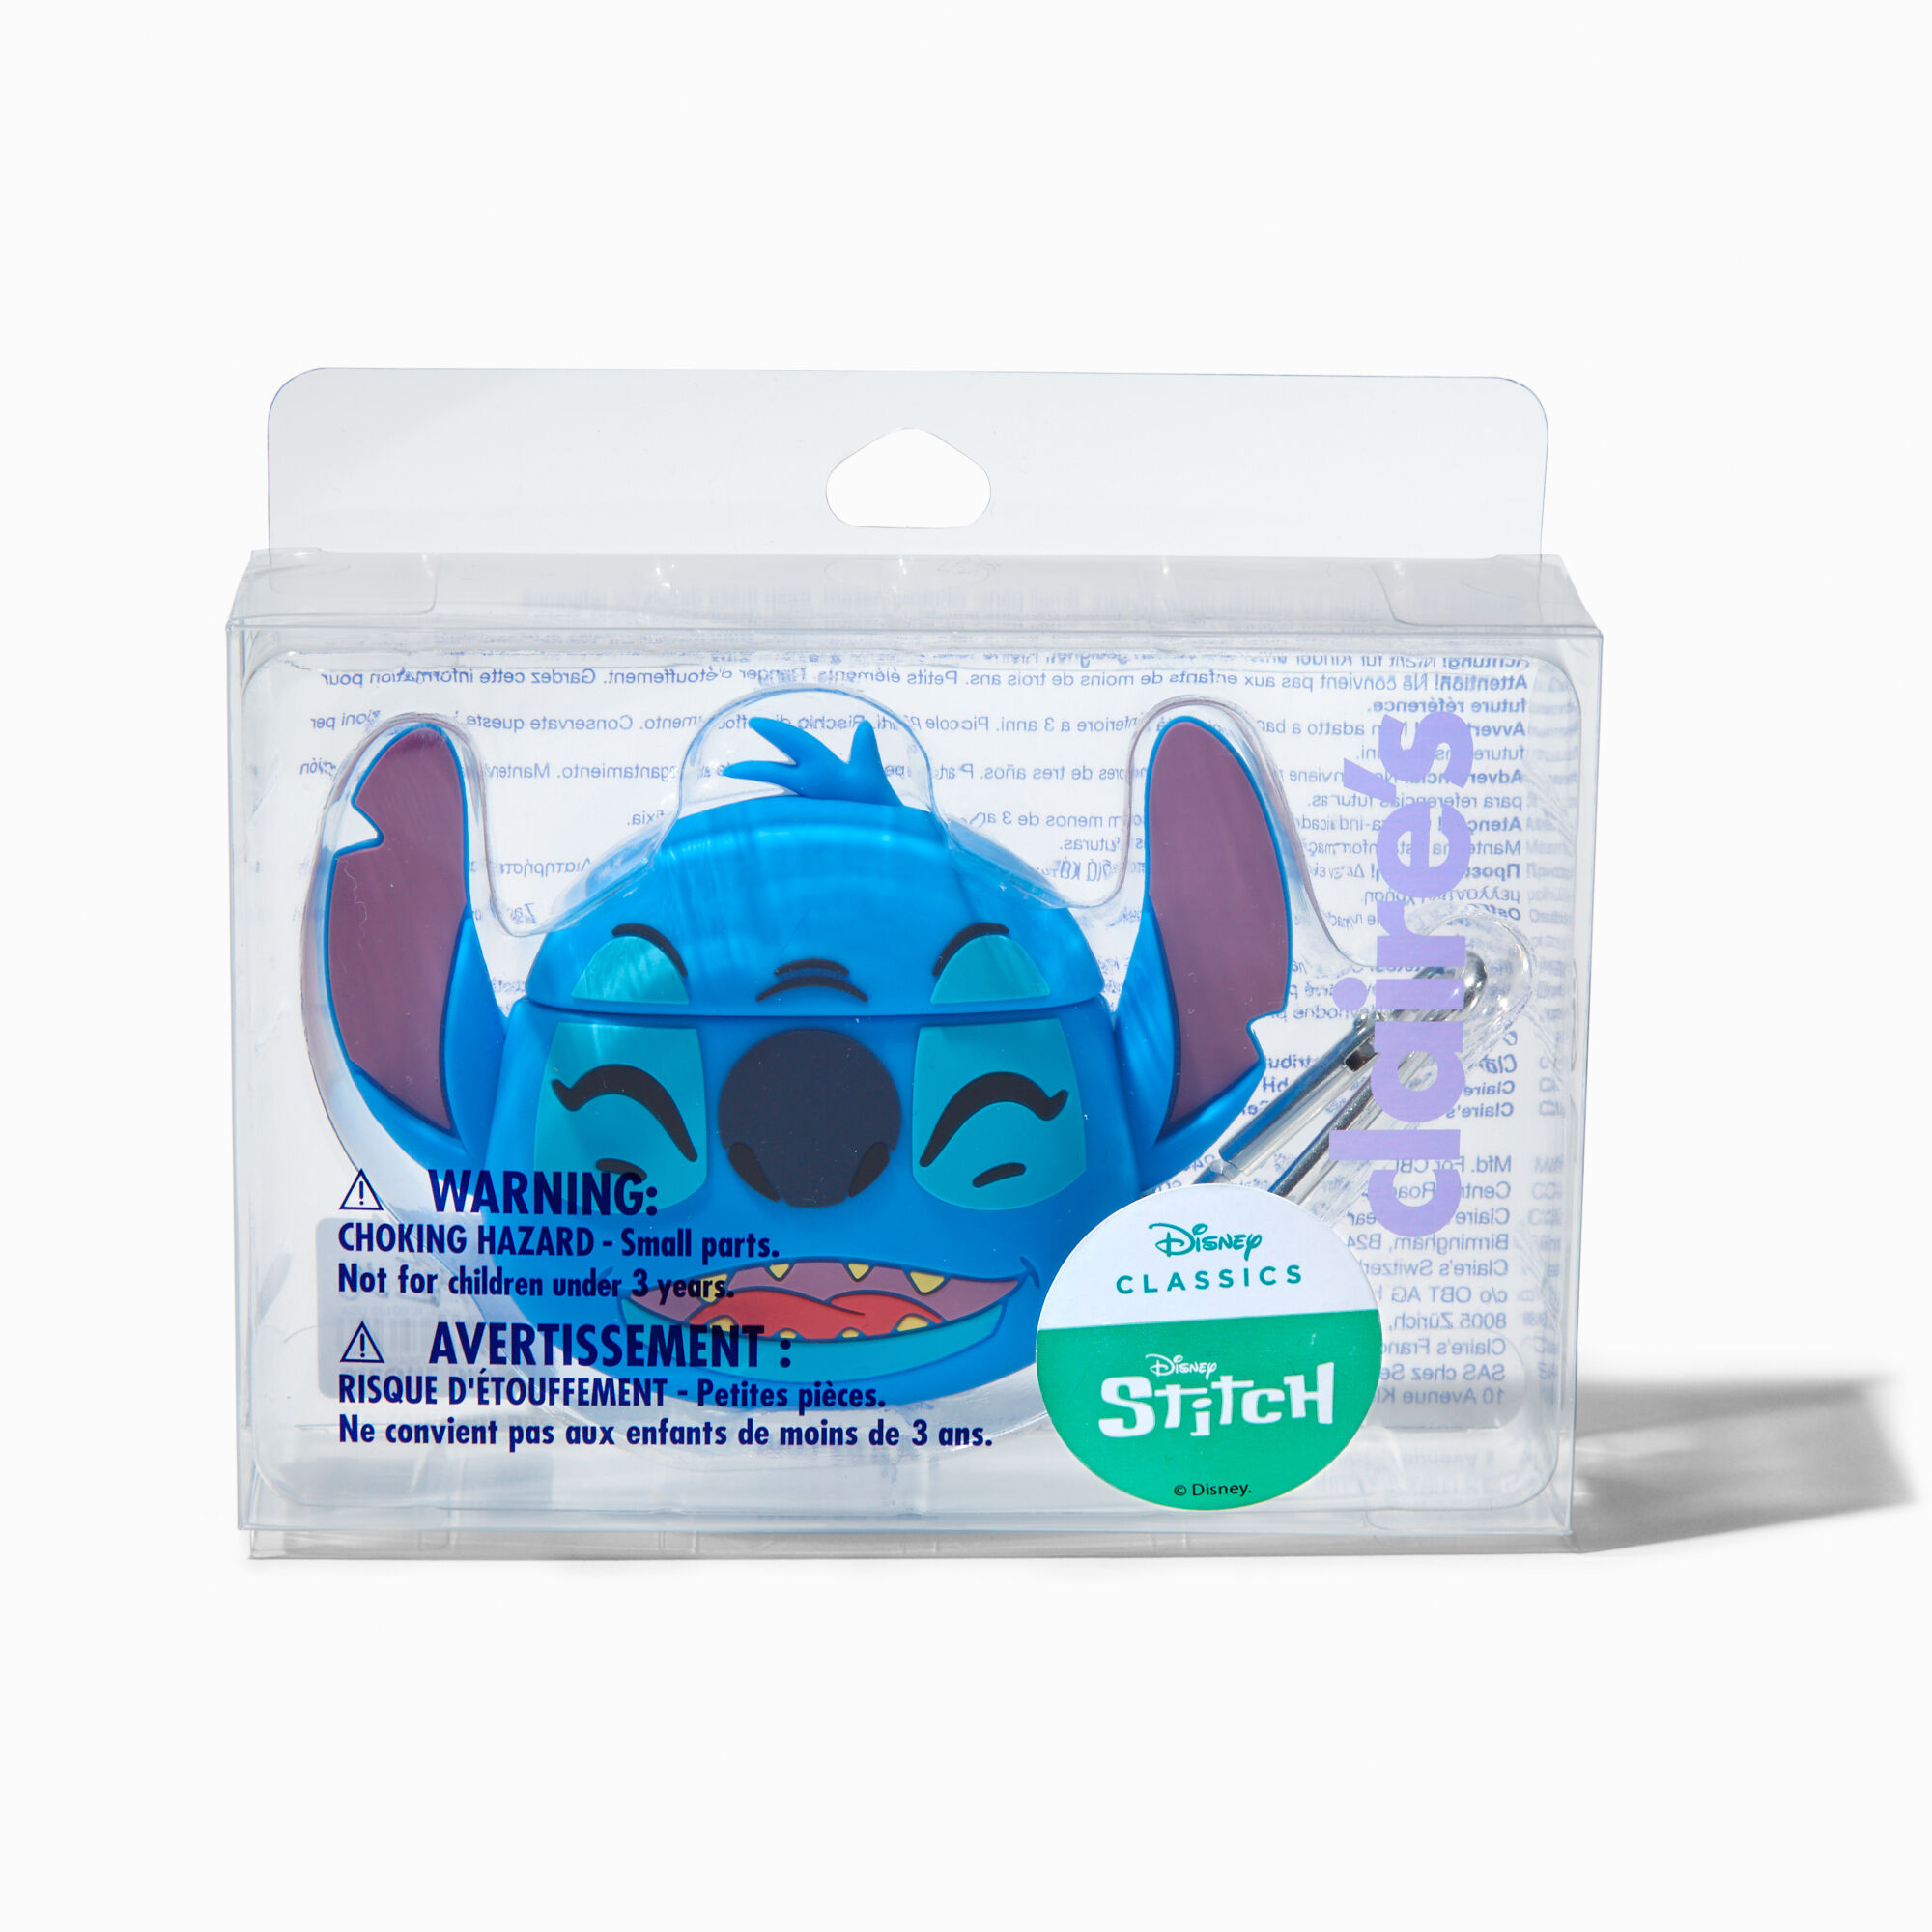 View Claires Disney Stitch Earbud Case Cover Compatible With Apple Airpods information